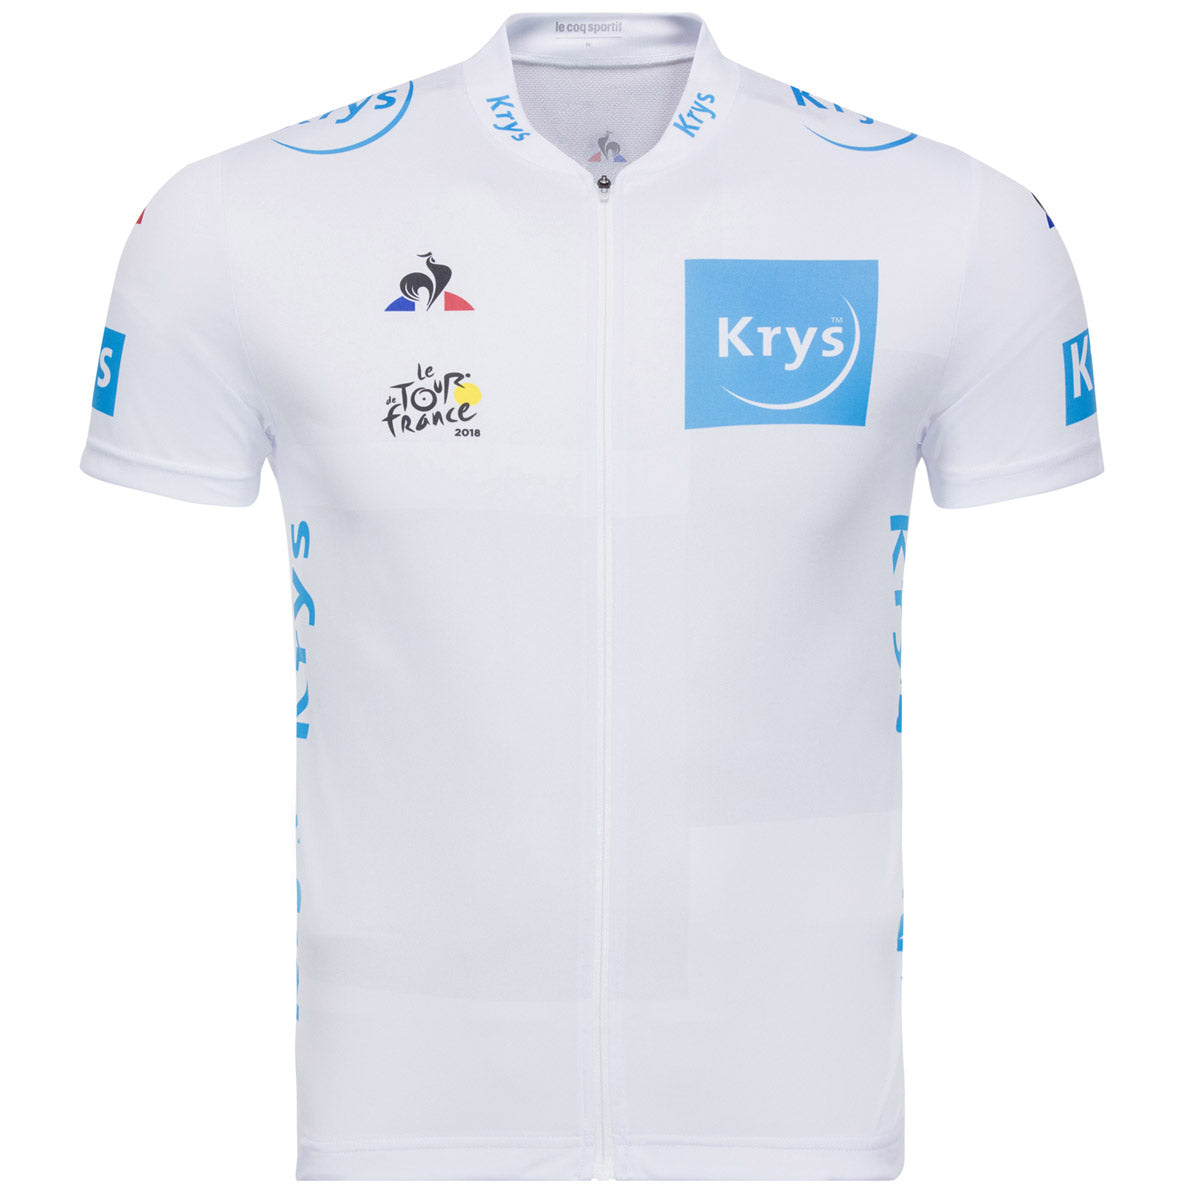 Tour De France White Jersey AG2R Citroen to get up and fight at Tour